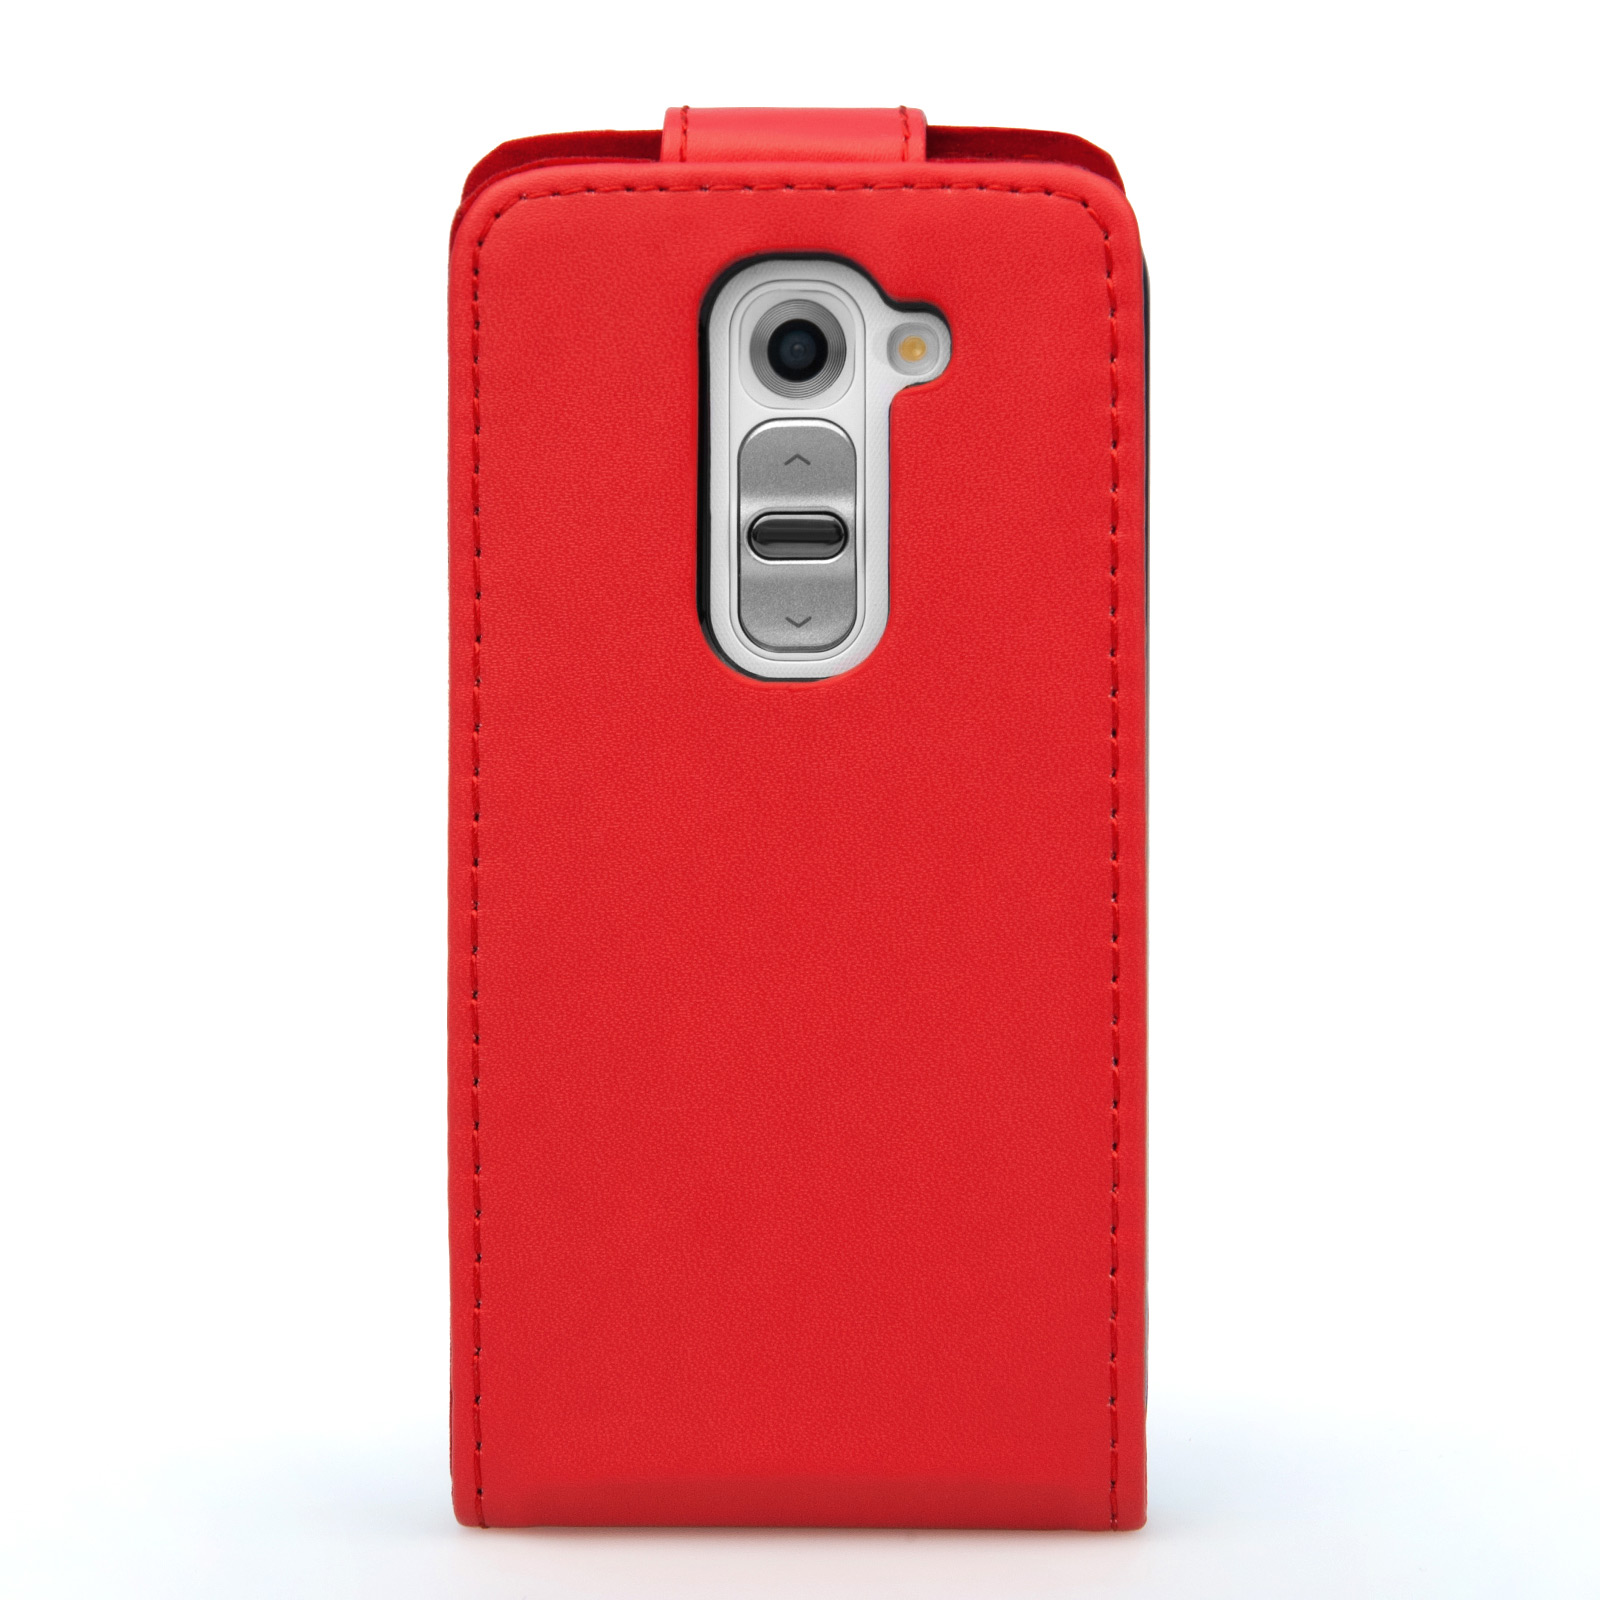 YouSave Accessories LG G2 Mini Leather-Effect Flip Case - Red